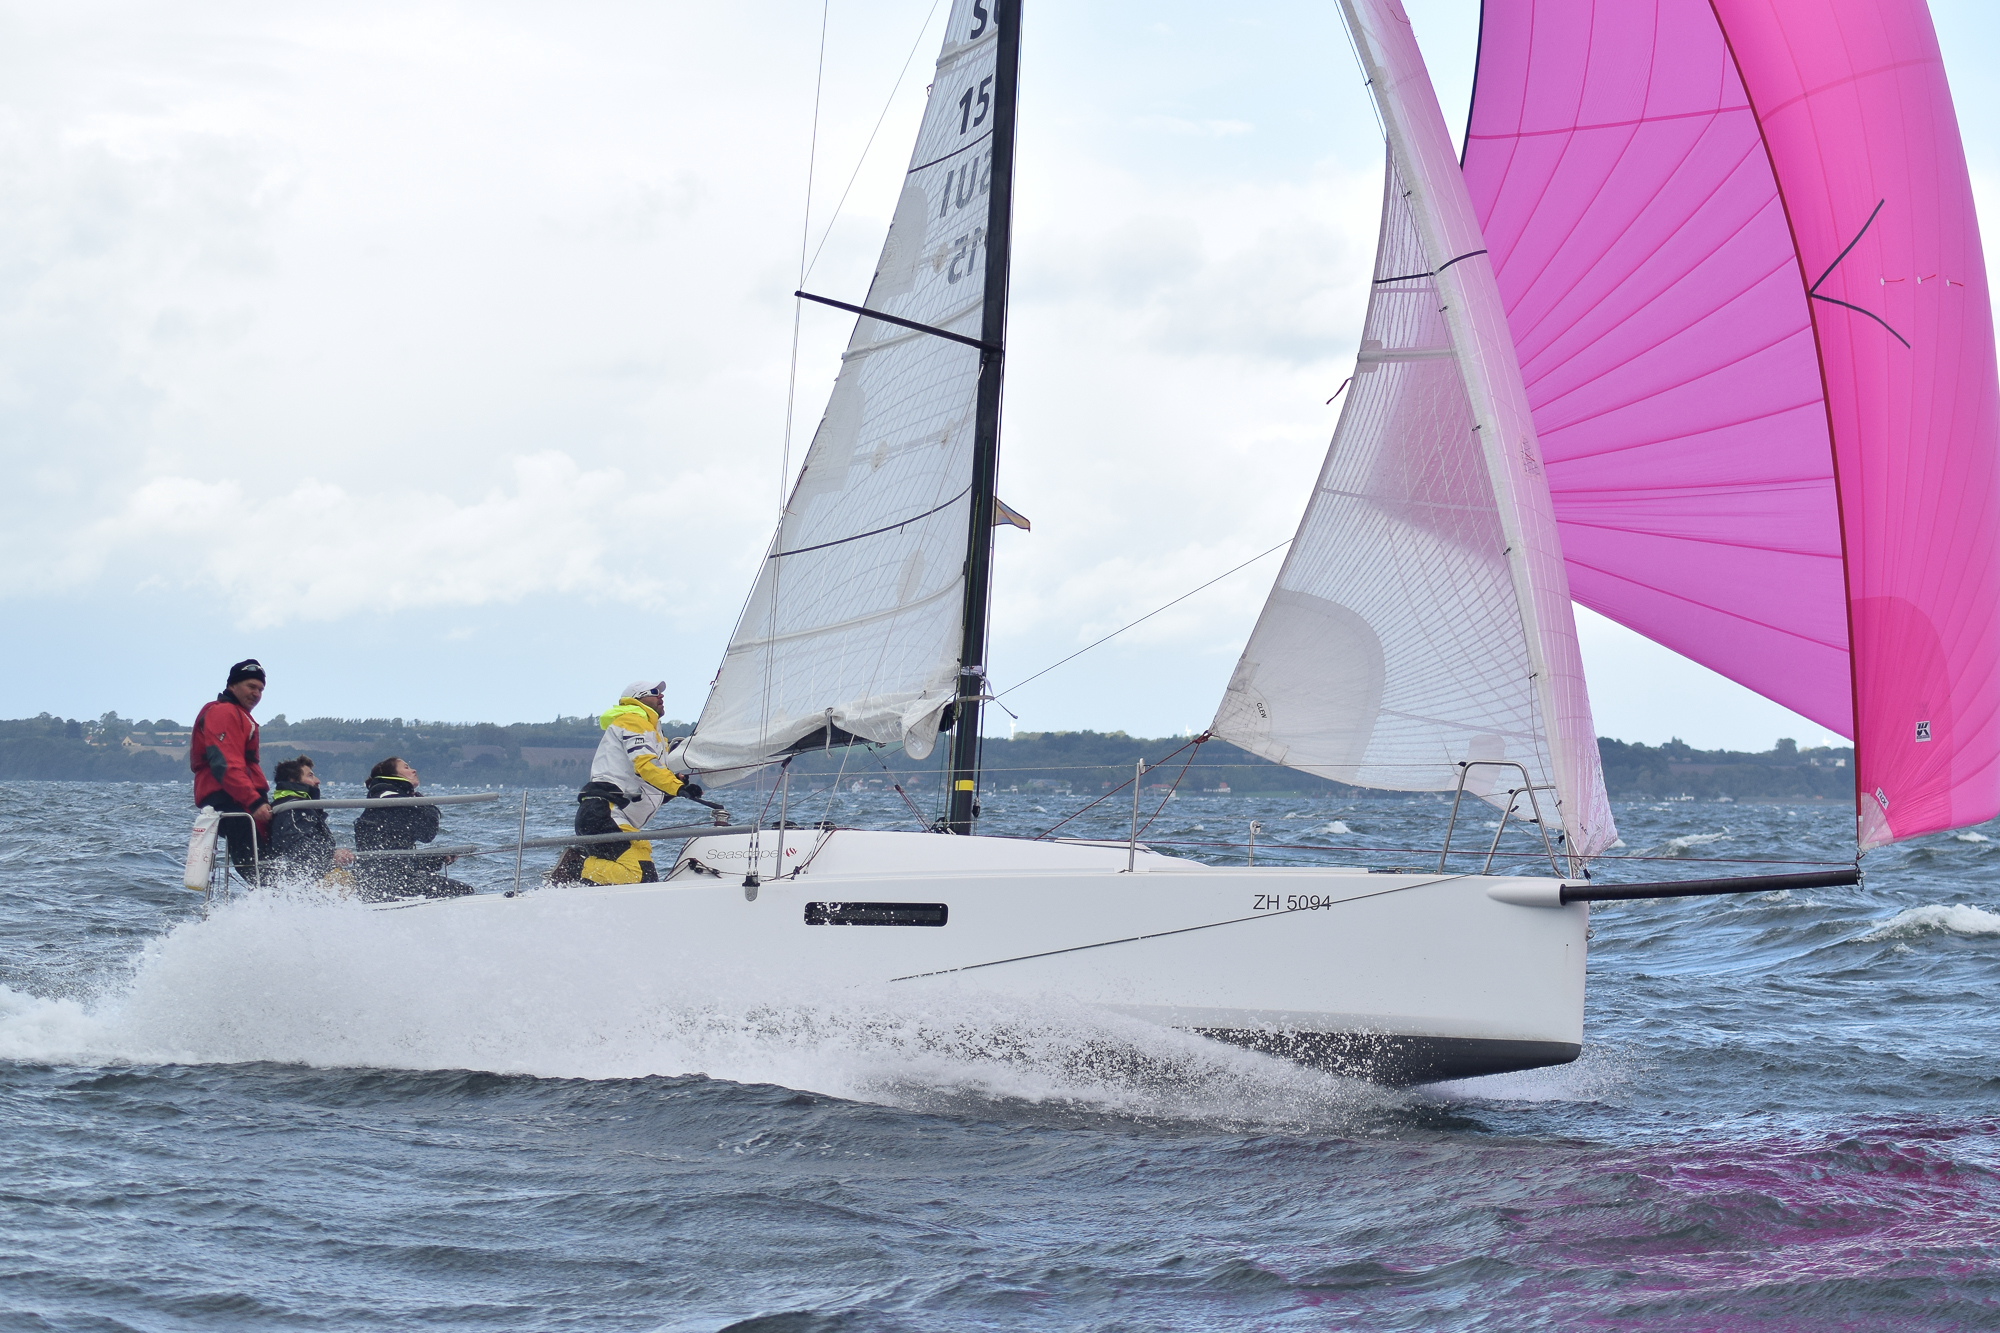 ESCAPADE with her reefed Tape-Drive Silver main, jib and fractional asymmetrical chute on the day she set the new speed record for a Seascape 27. All of her sails are original from 2013.